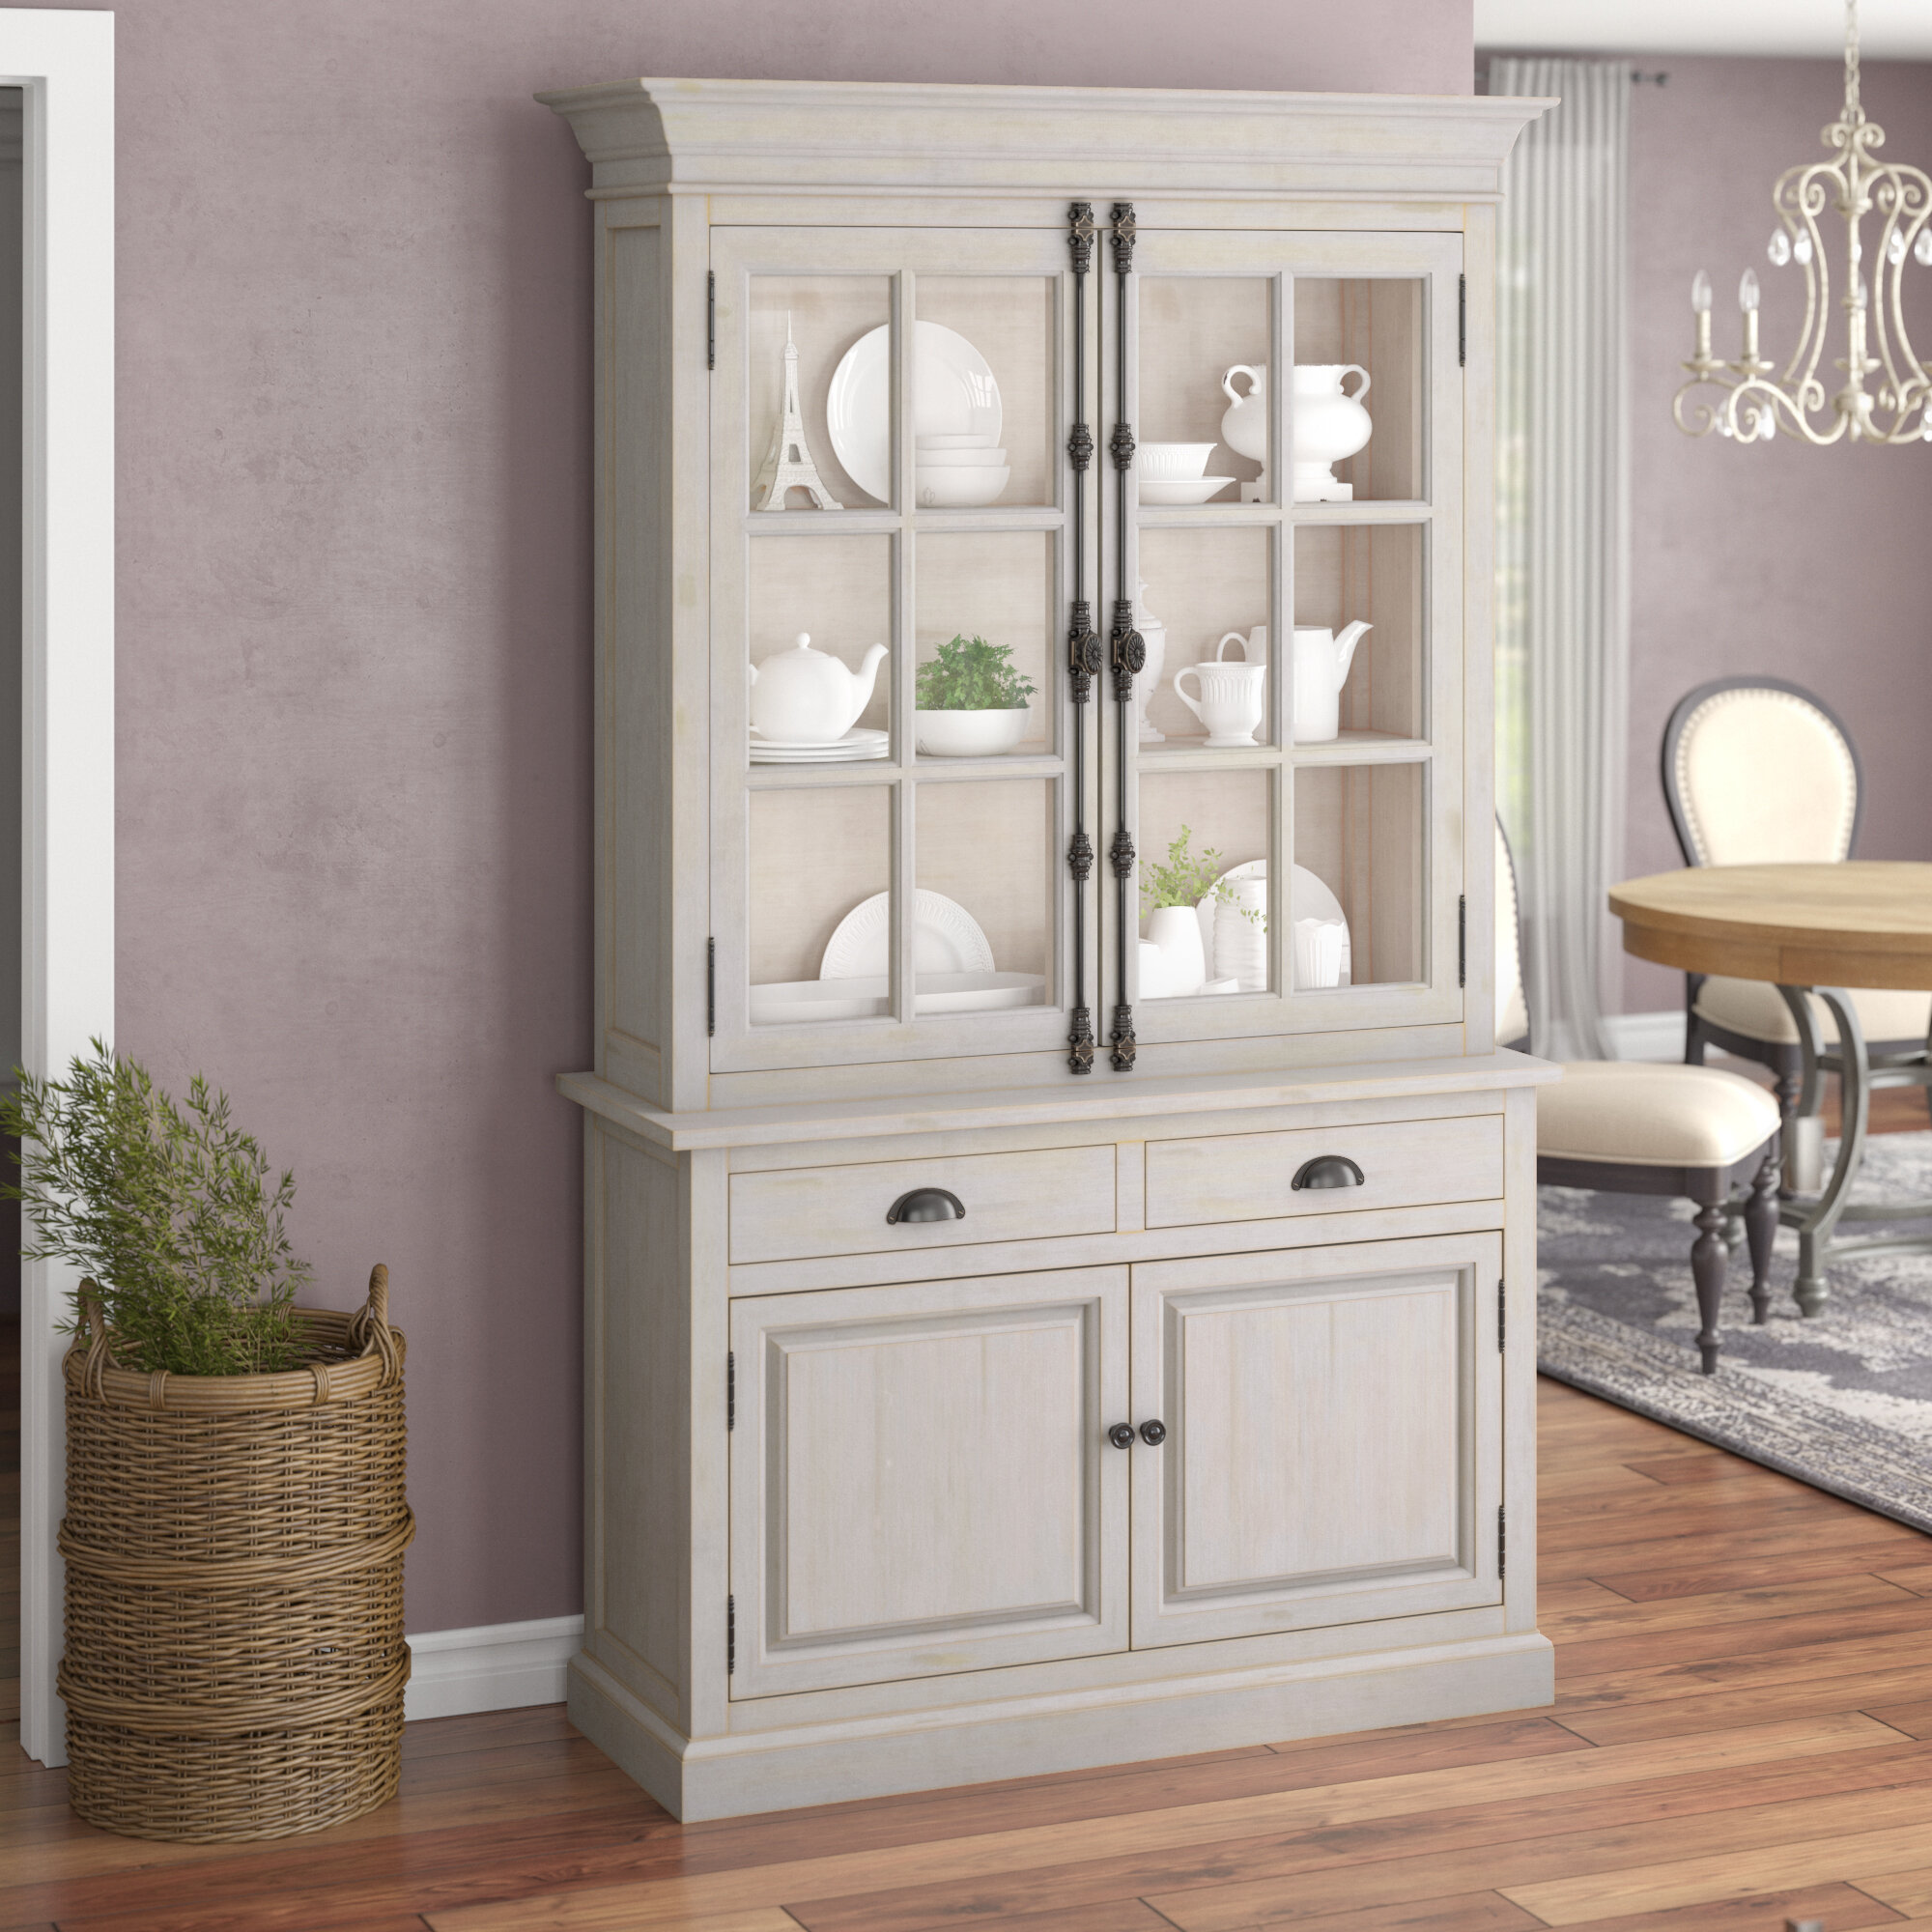 Laurel Foundry Modern Farmhouse Nettie China Cabinet Reviews